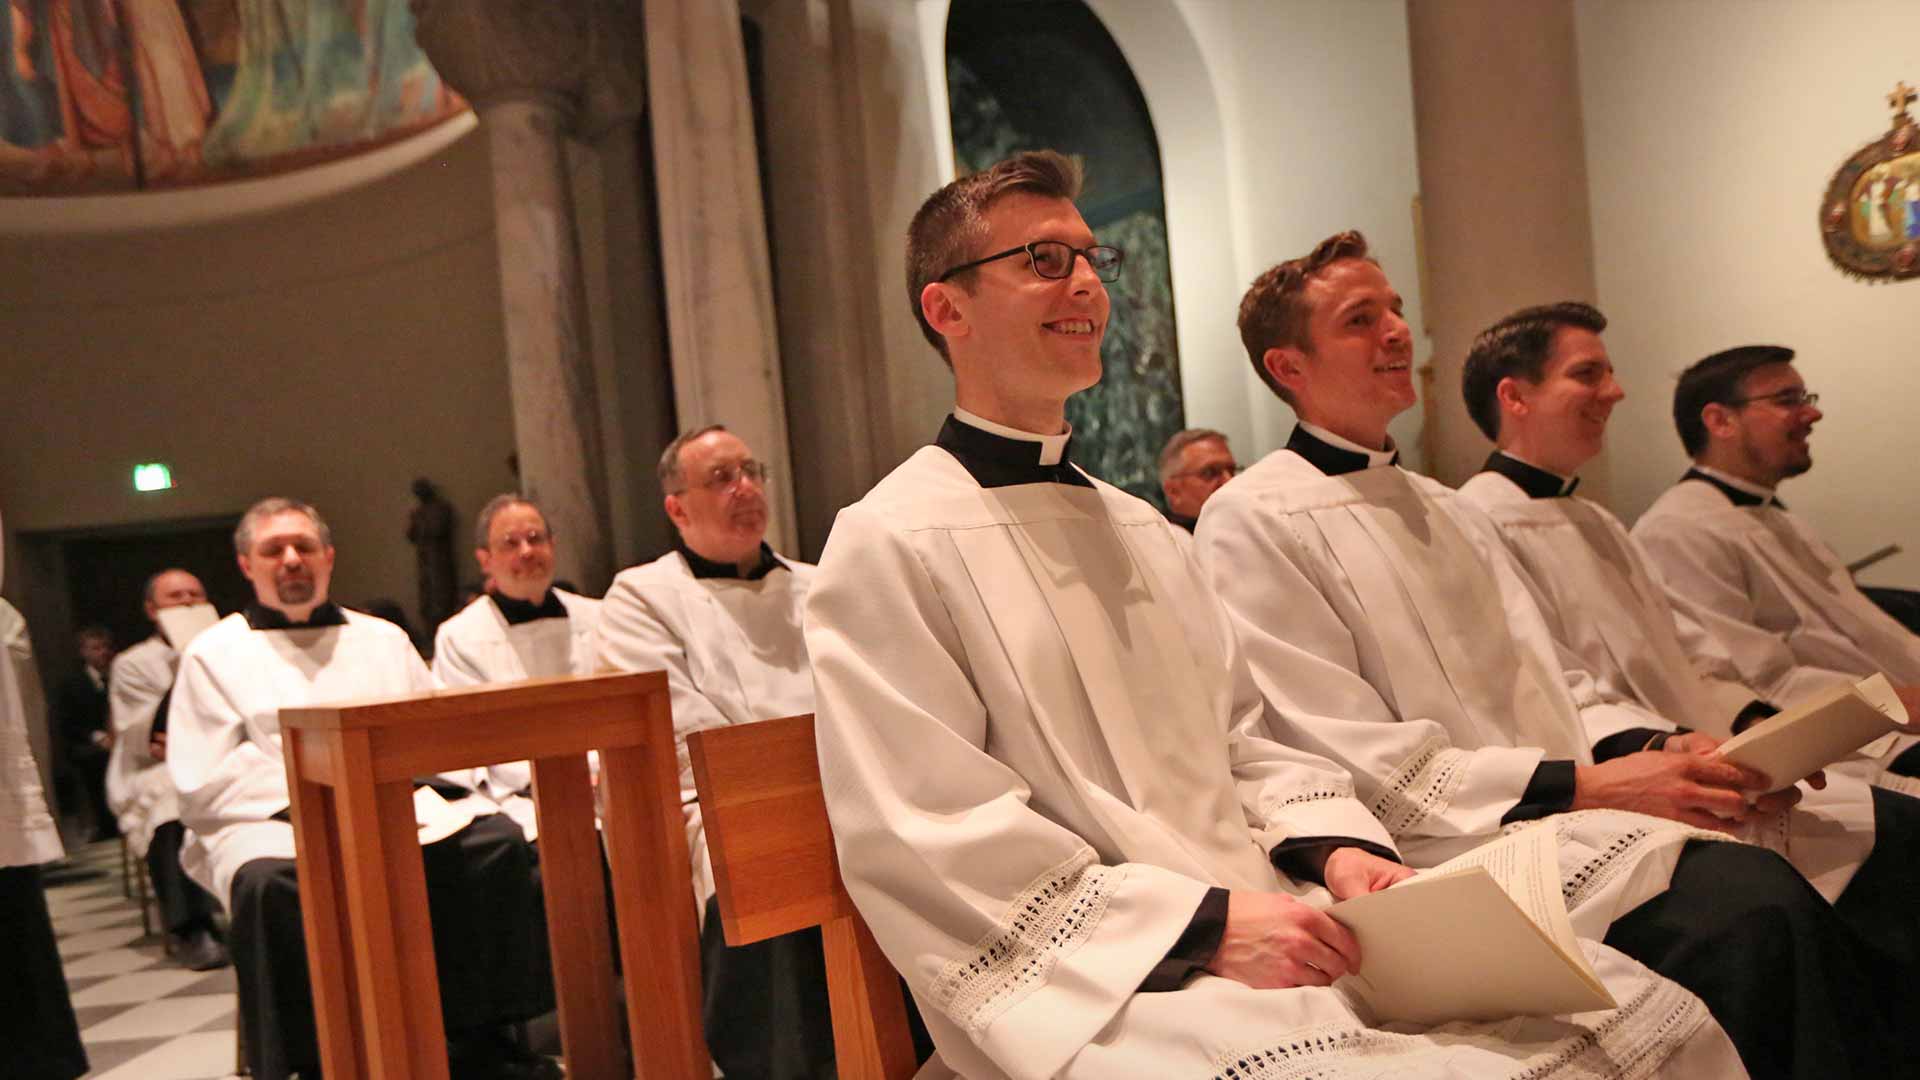 Seminarians sitting and smiling in Chapel